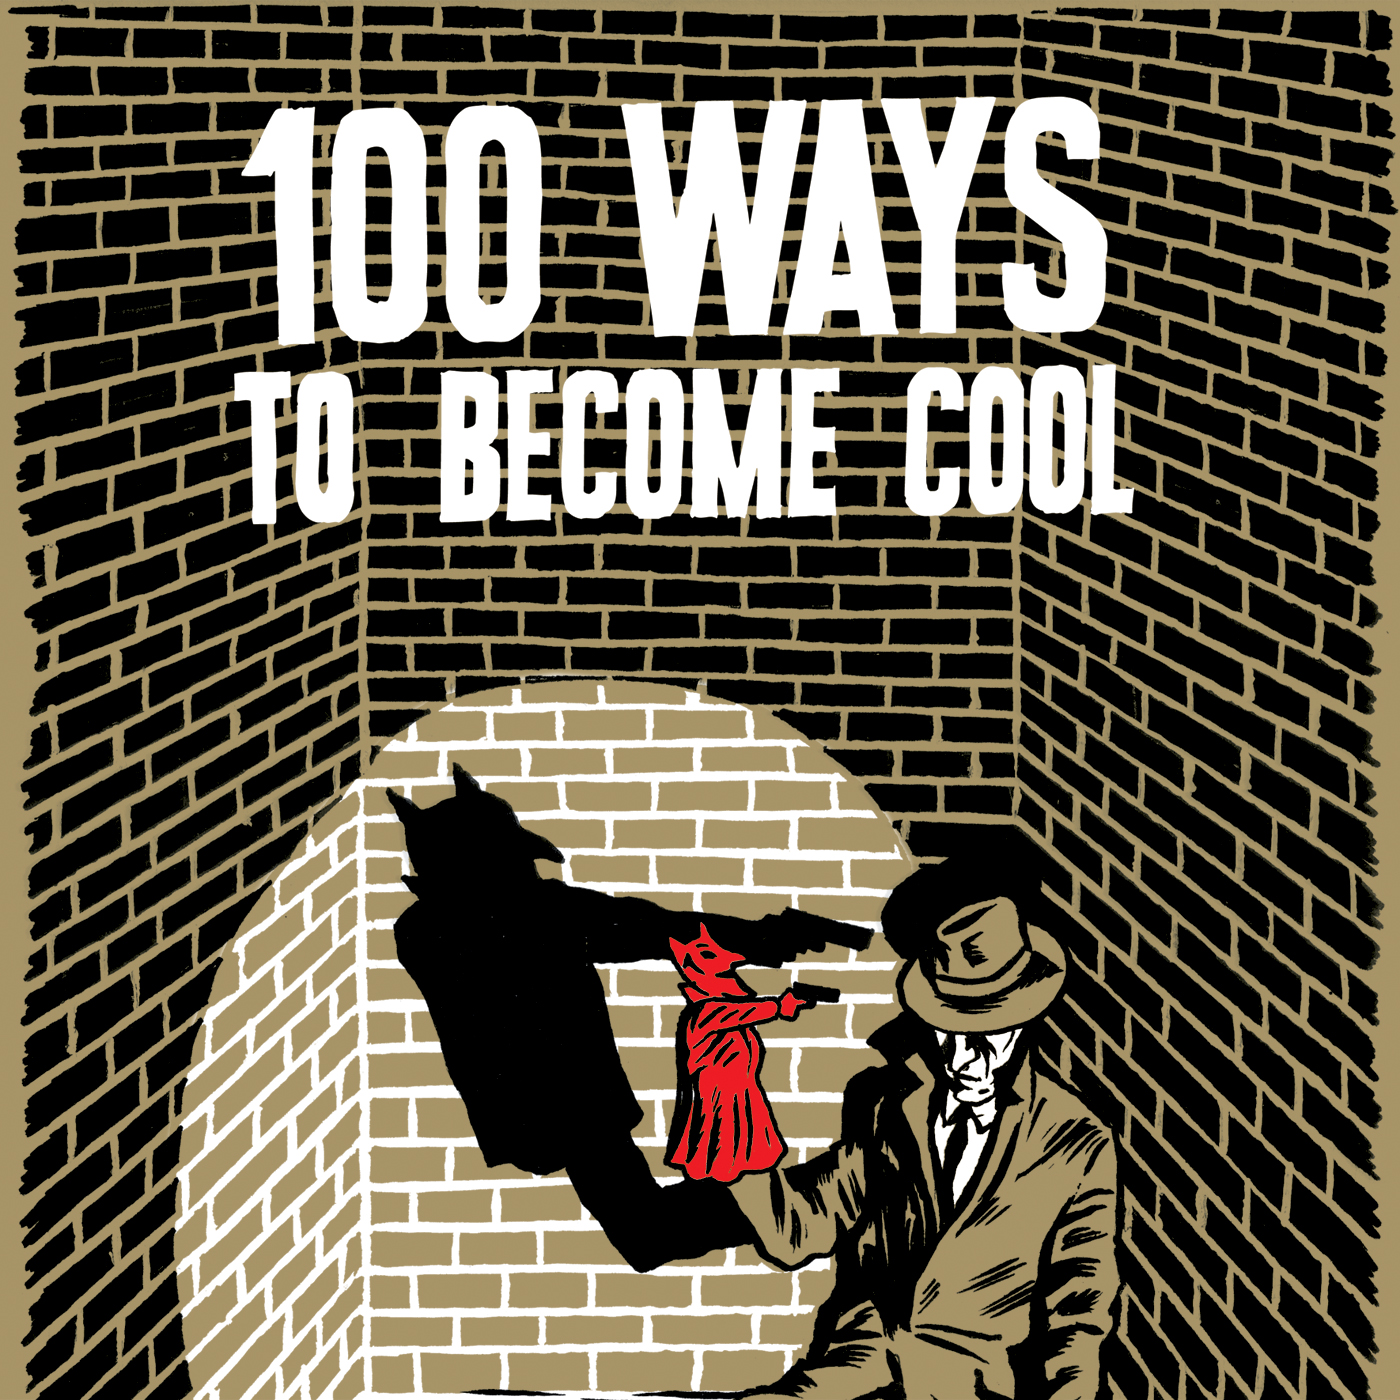 NM026: gone bald - 100 ways to become cool